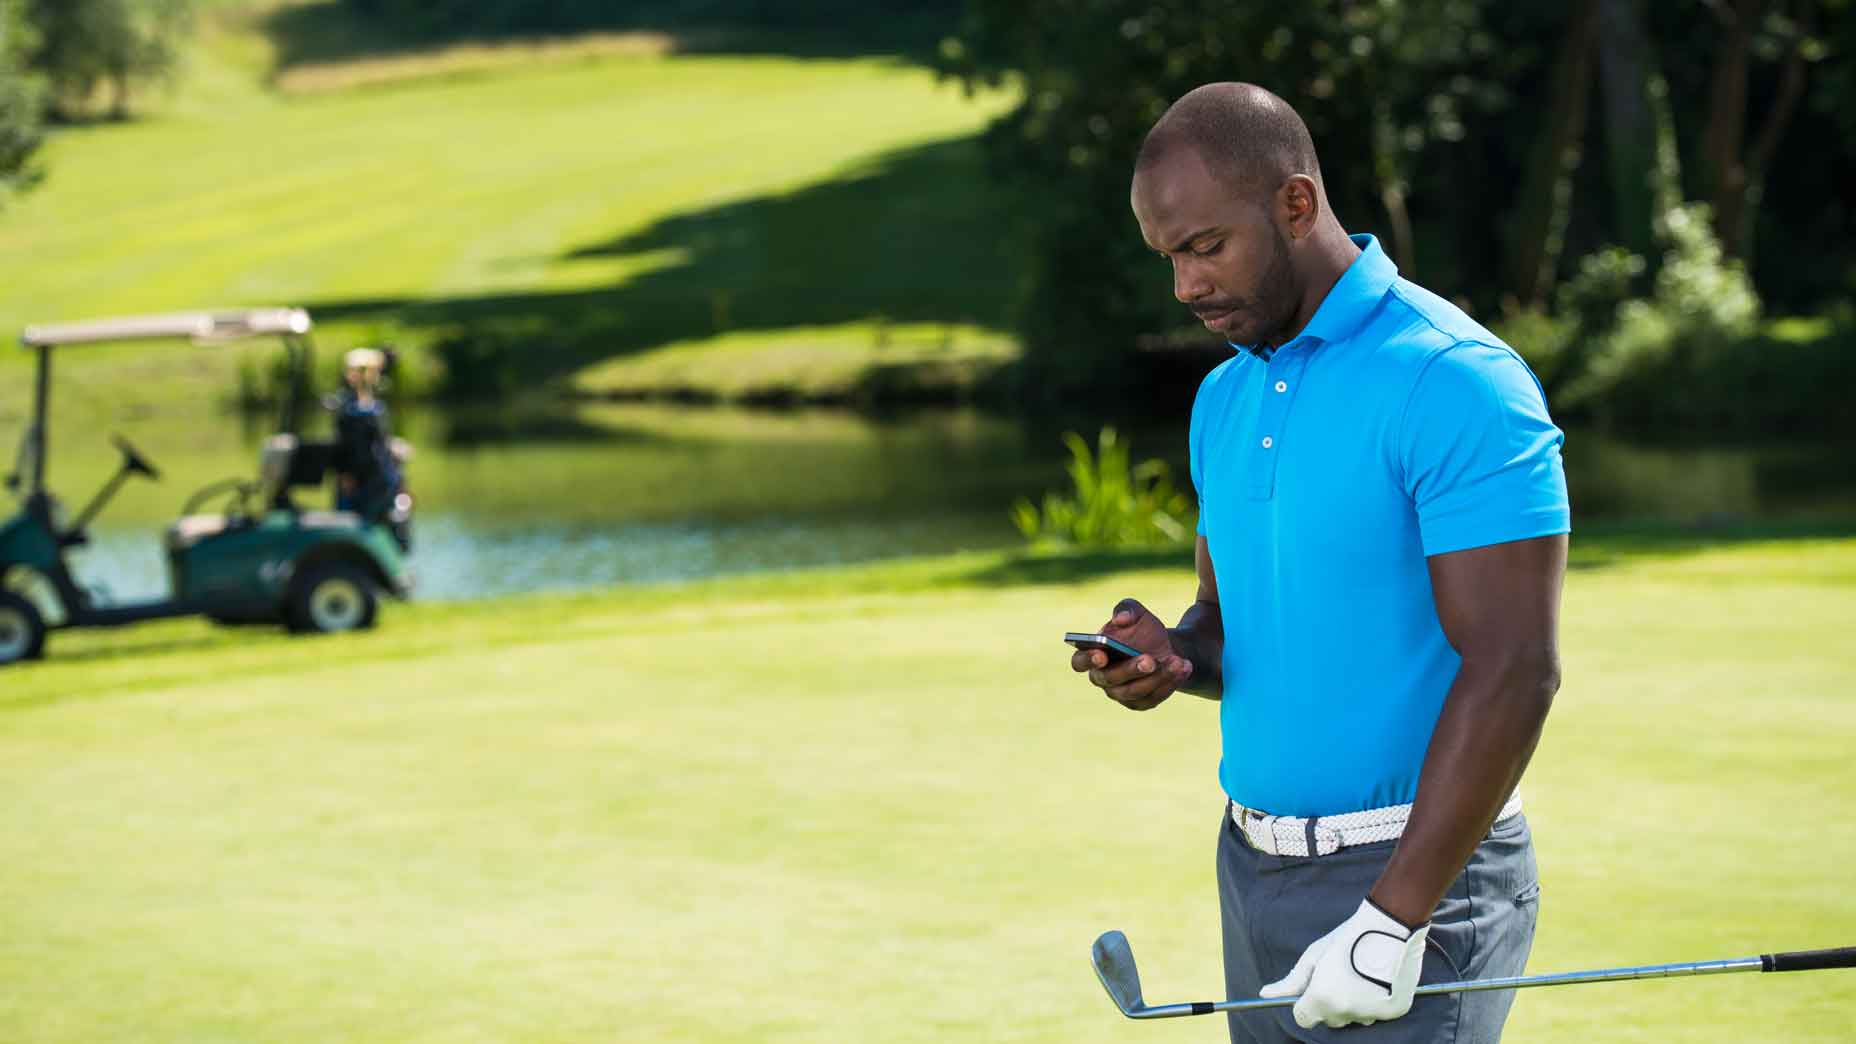 Golfer using his mobile on the course while carrying his clubs